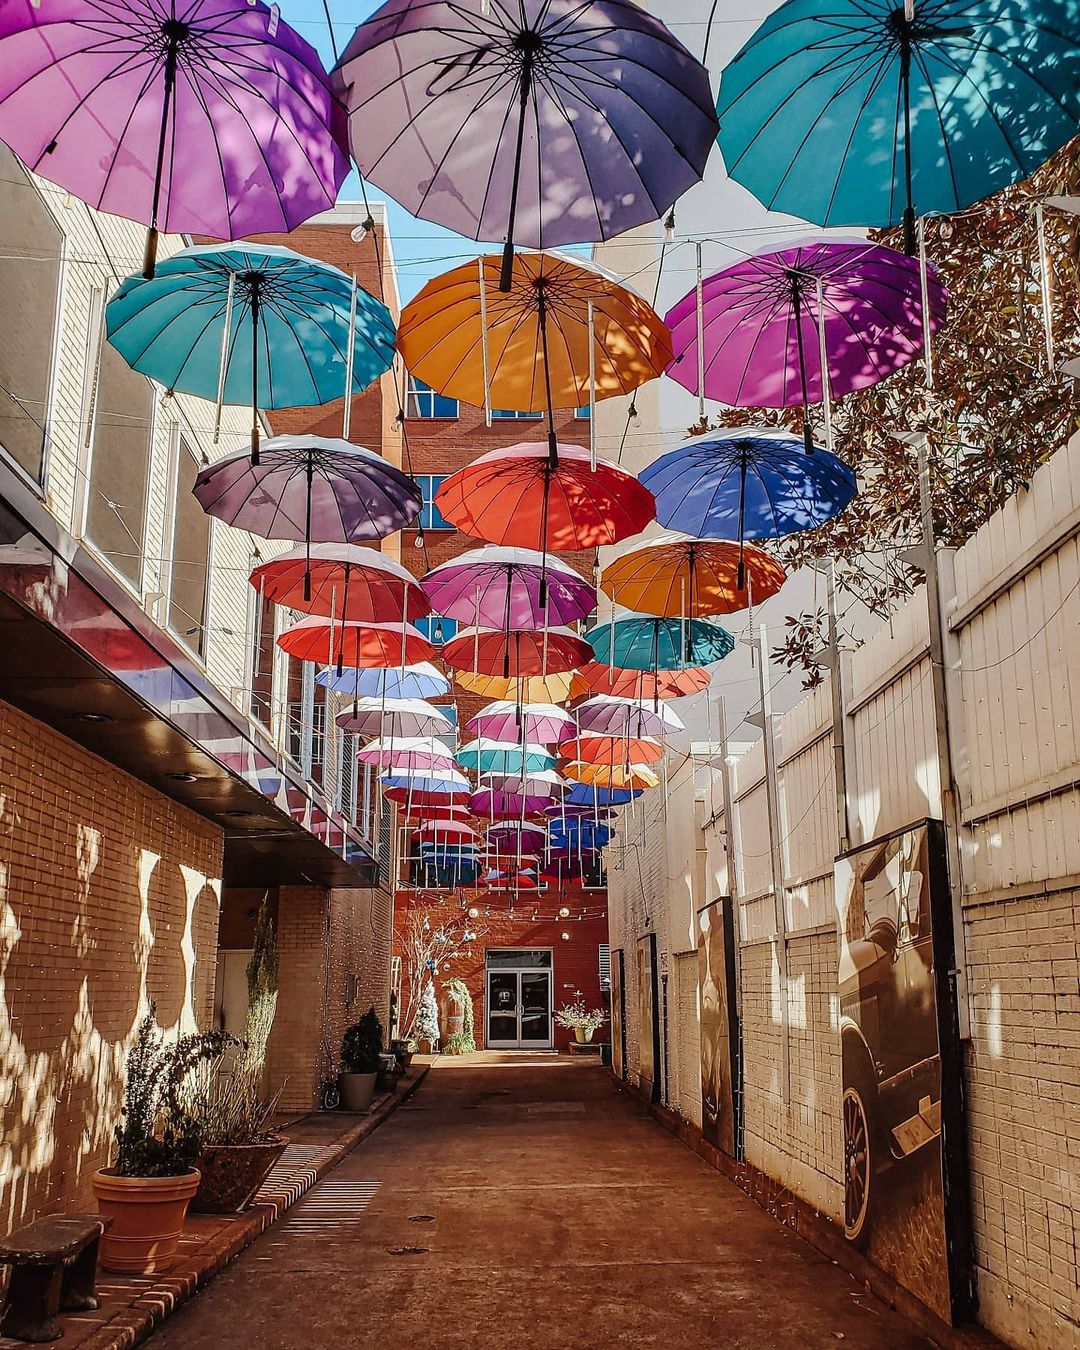 Multi-Colored Umbrella Art Installation in Downtown Chattanooga. Photo by Instagram user @loveaffairwitheverywhere